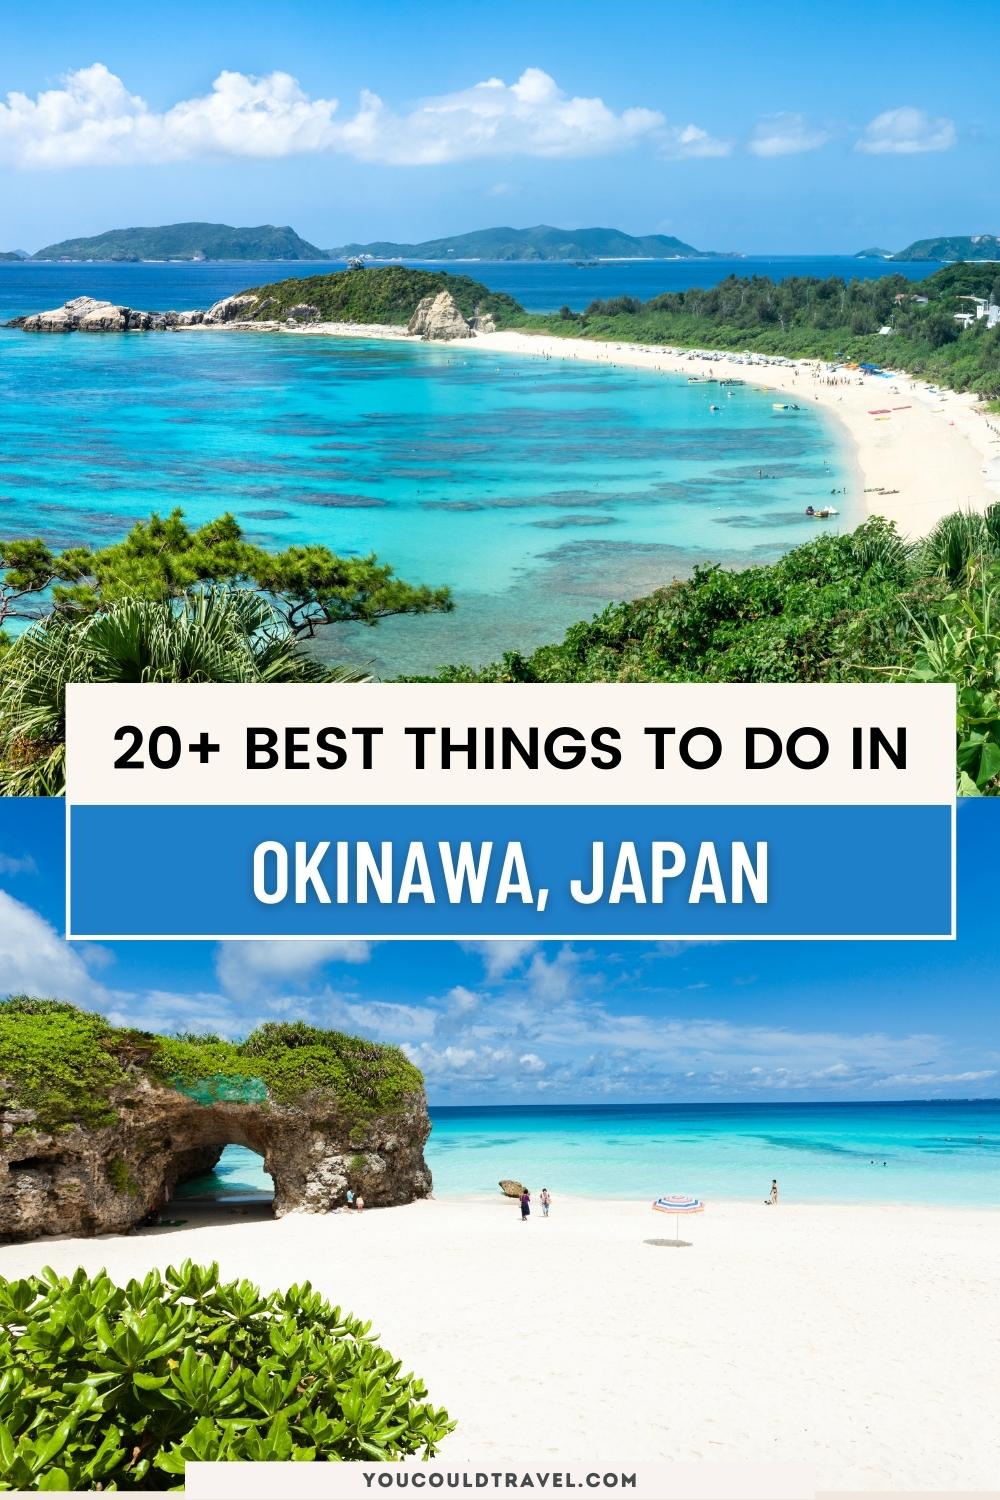 Best things to do in Okinawa Japan